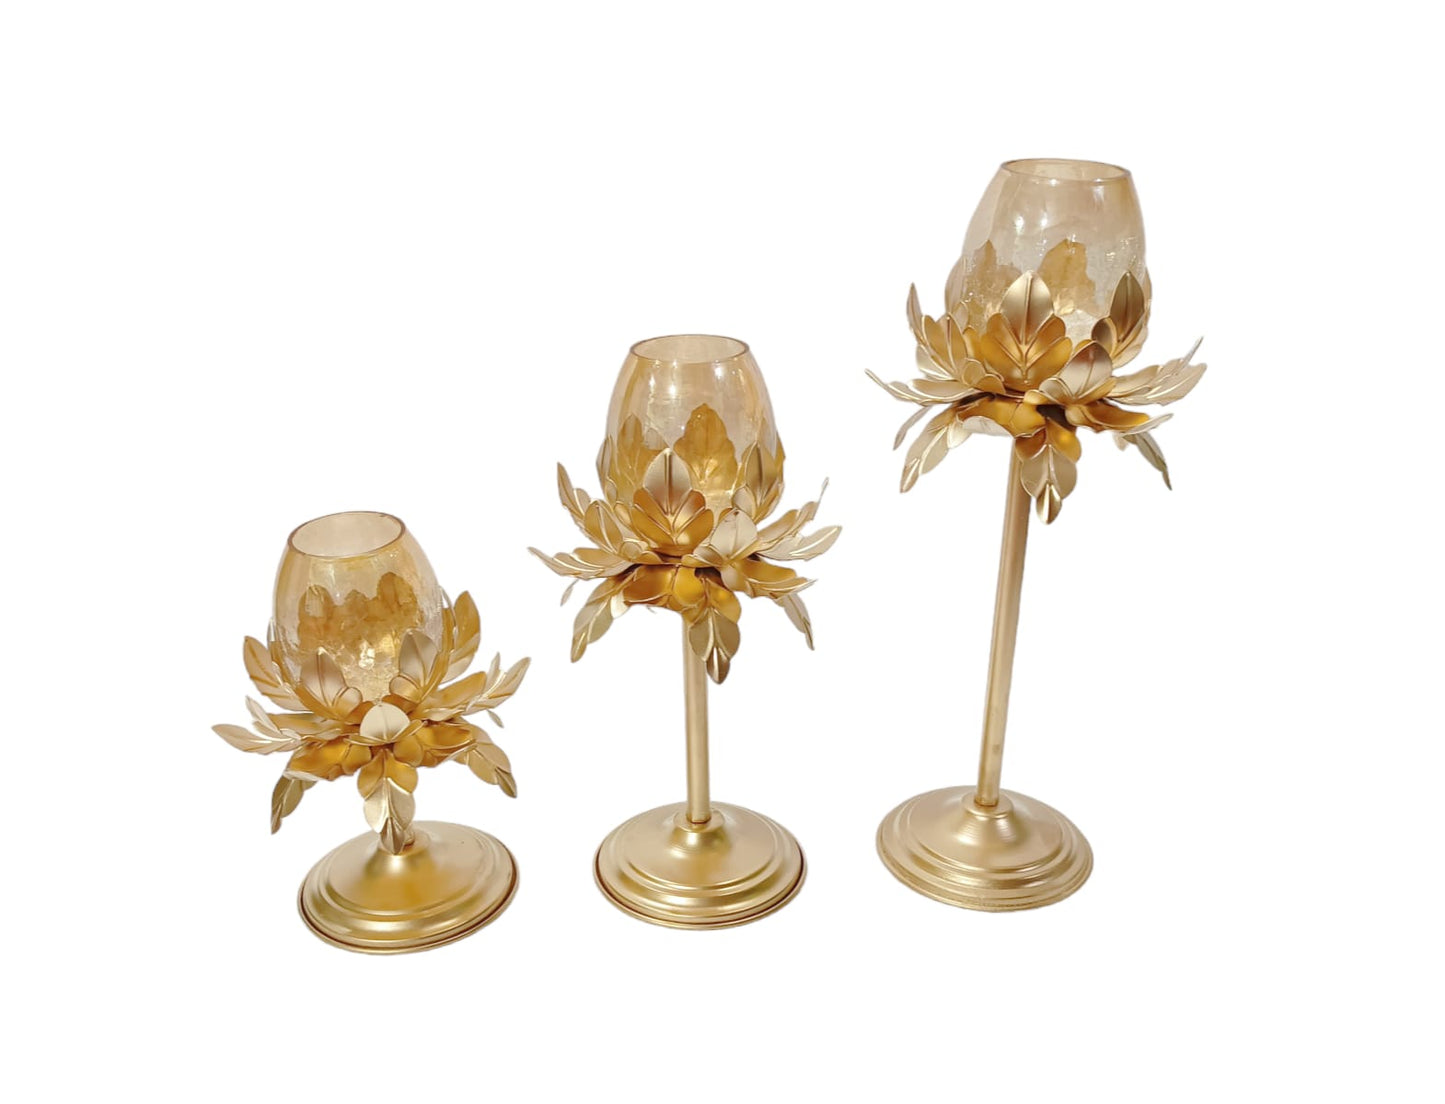 Double Leaf Lotus Stand (Set of 3)